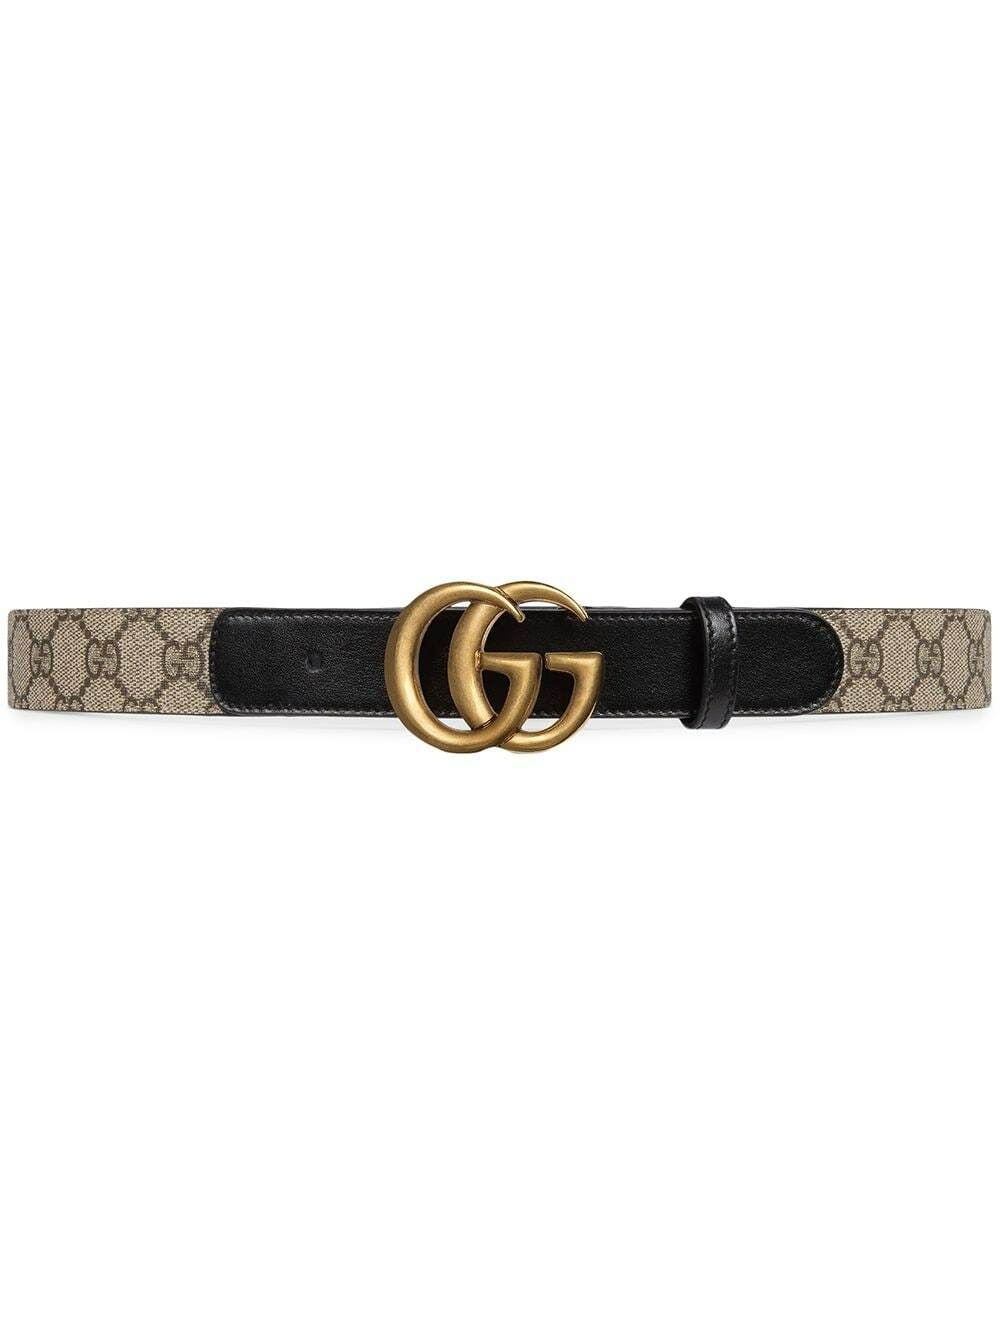 GUCCI - Gg Marmont Leather Belt Gucci